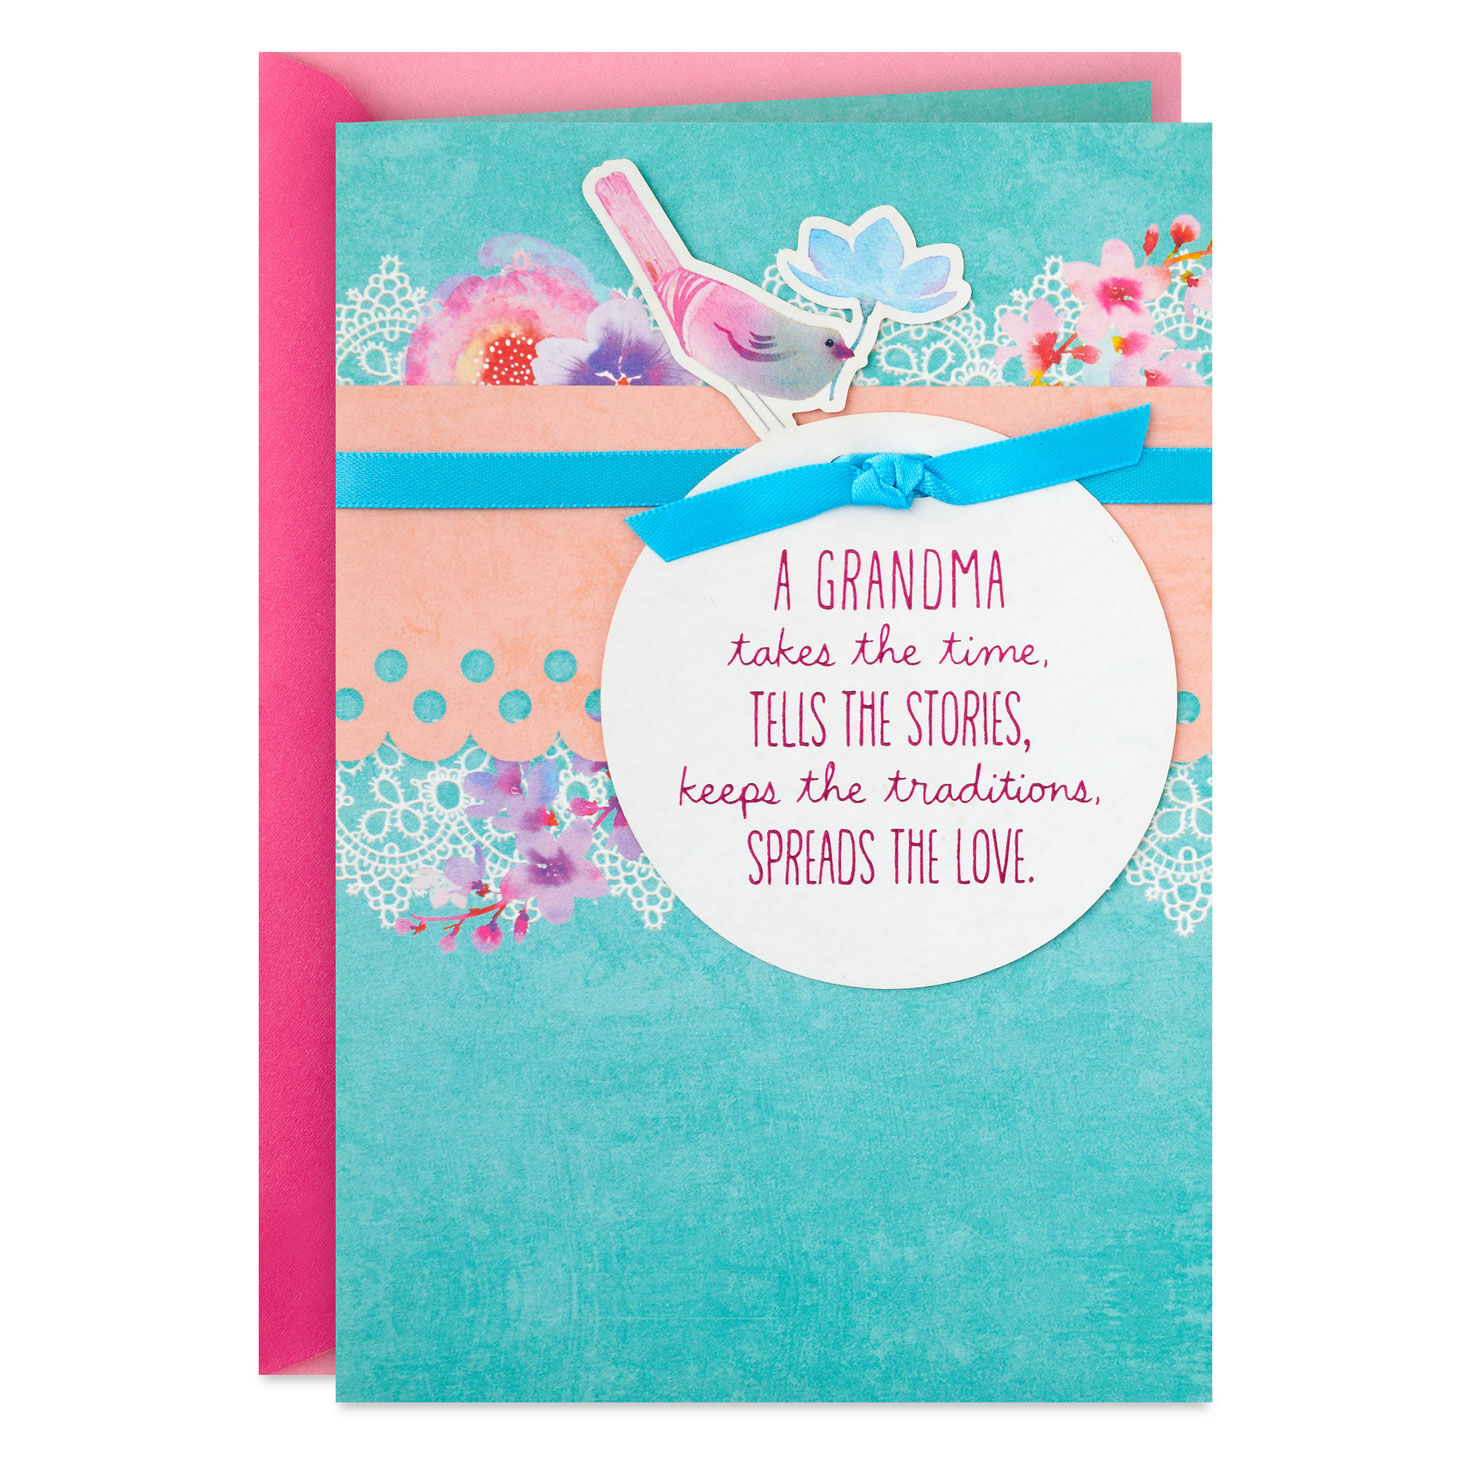 You're Simply the Best Mother's Day Card for Grandma for only USD 5.59 | Hallmark